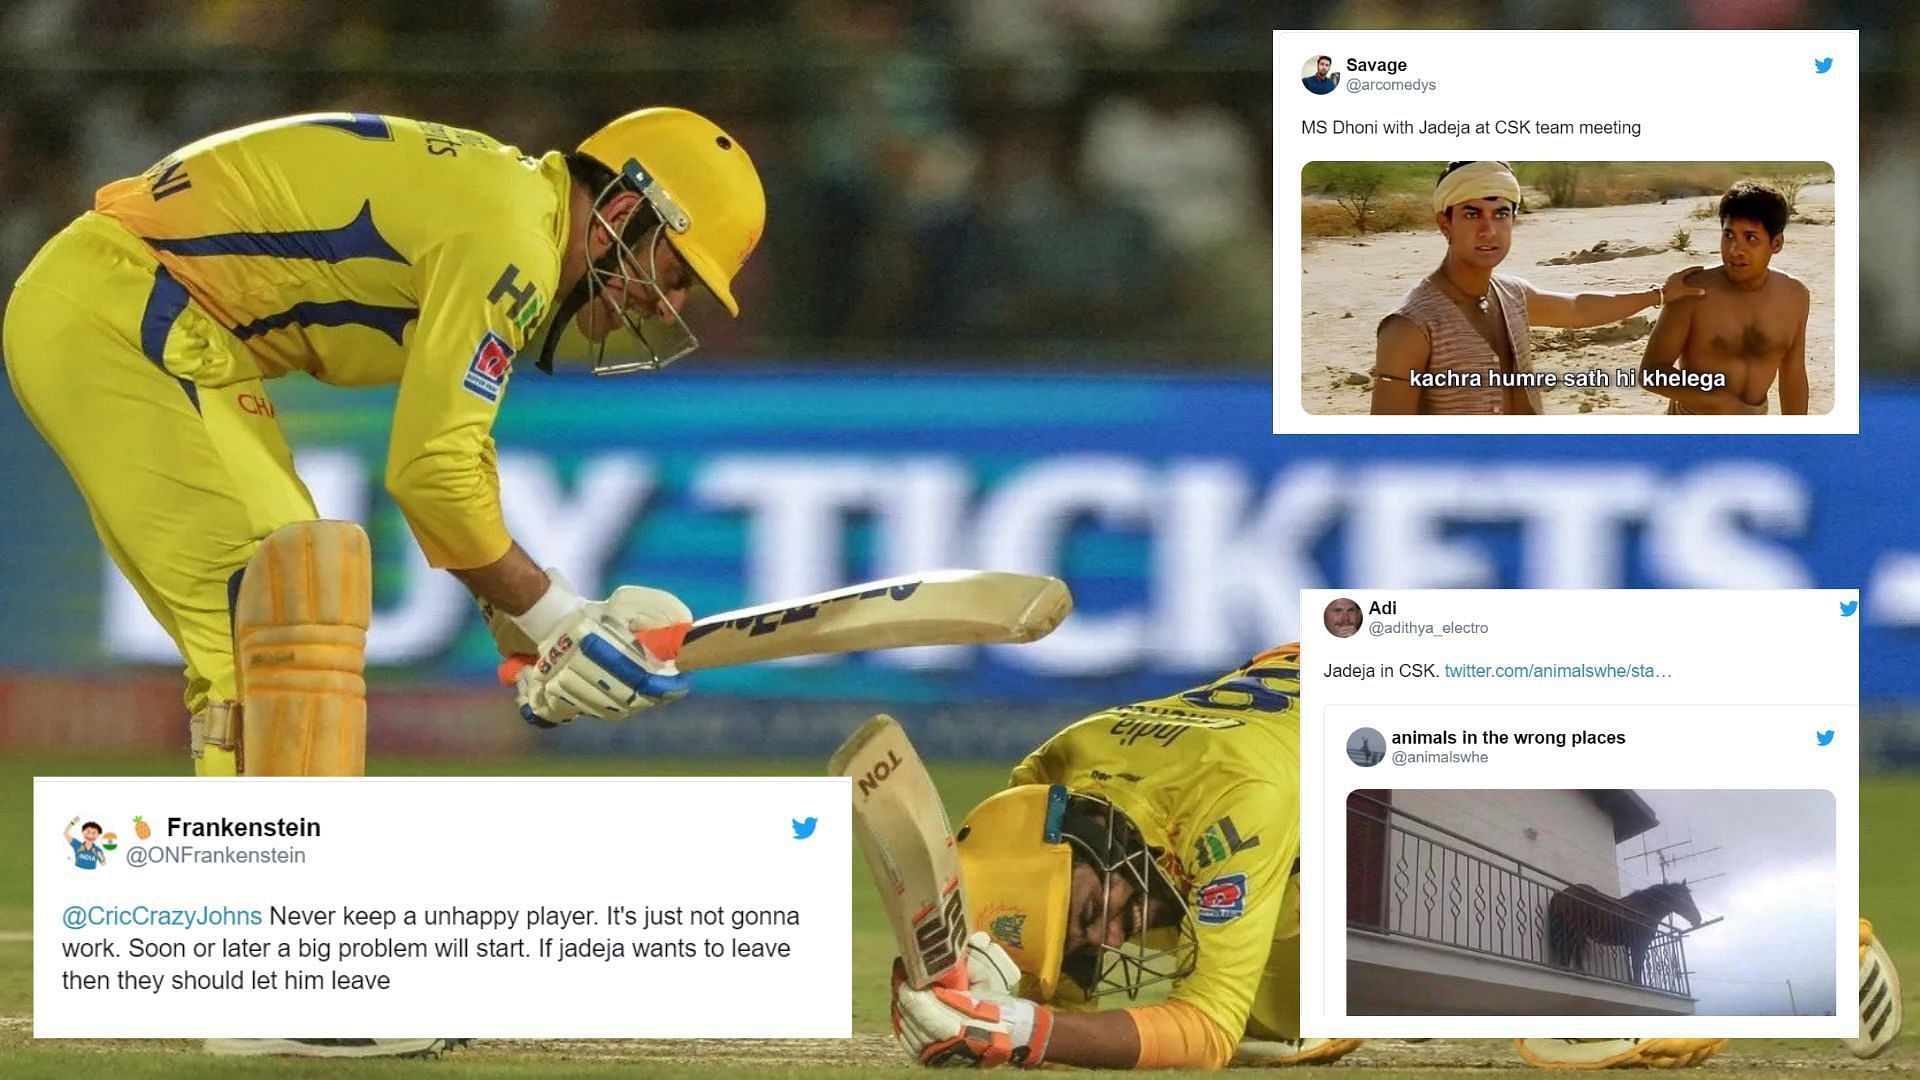 &quot;When MS talks, you listen&quot; - Twitter reacts to Ravindra Jadeja potentially staying with CSK upon MS Dhoni